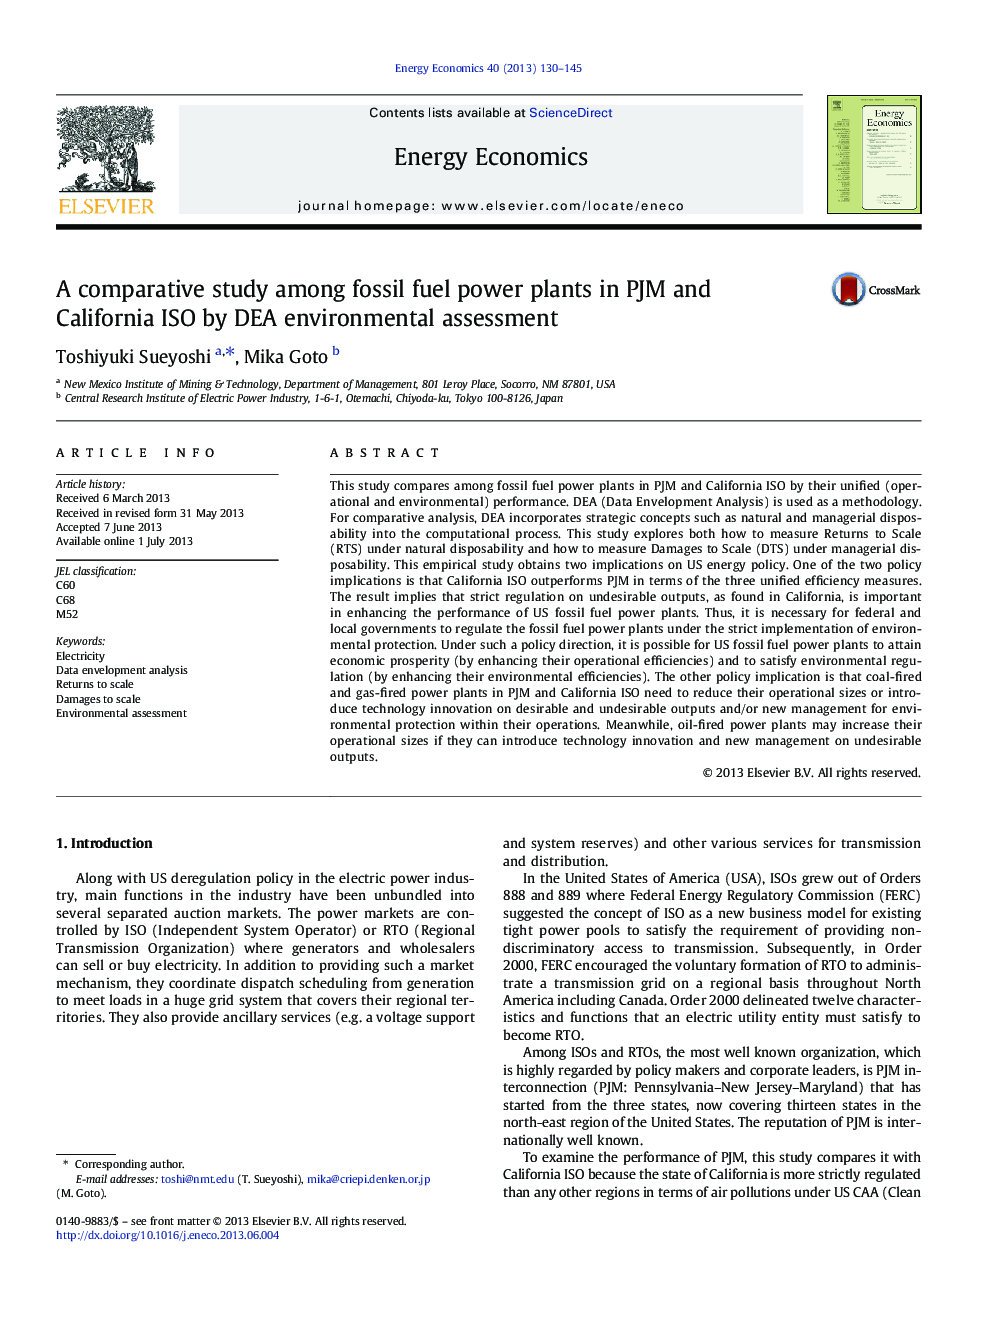 A comparative study among fossil fuel power plants in PJM and California ISO by DEA environmental assessment